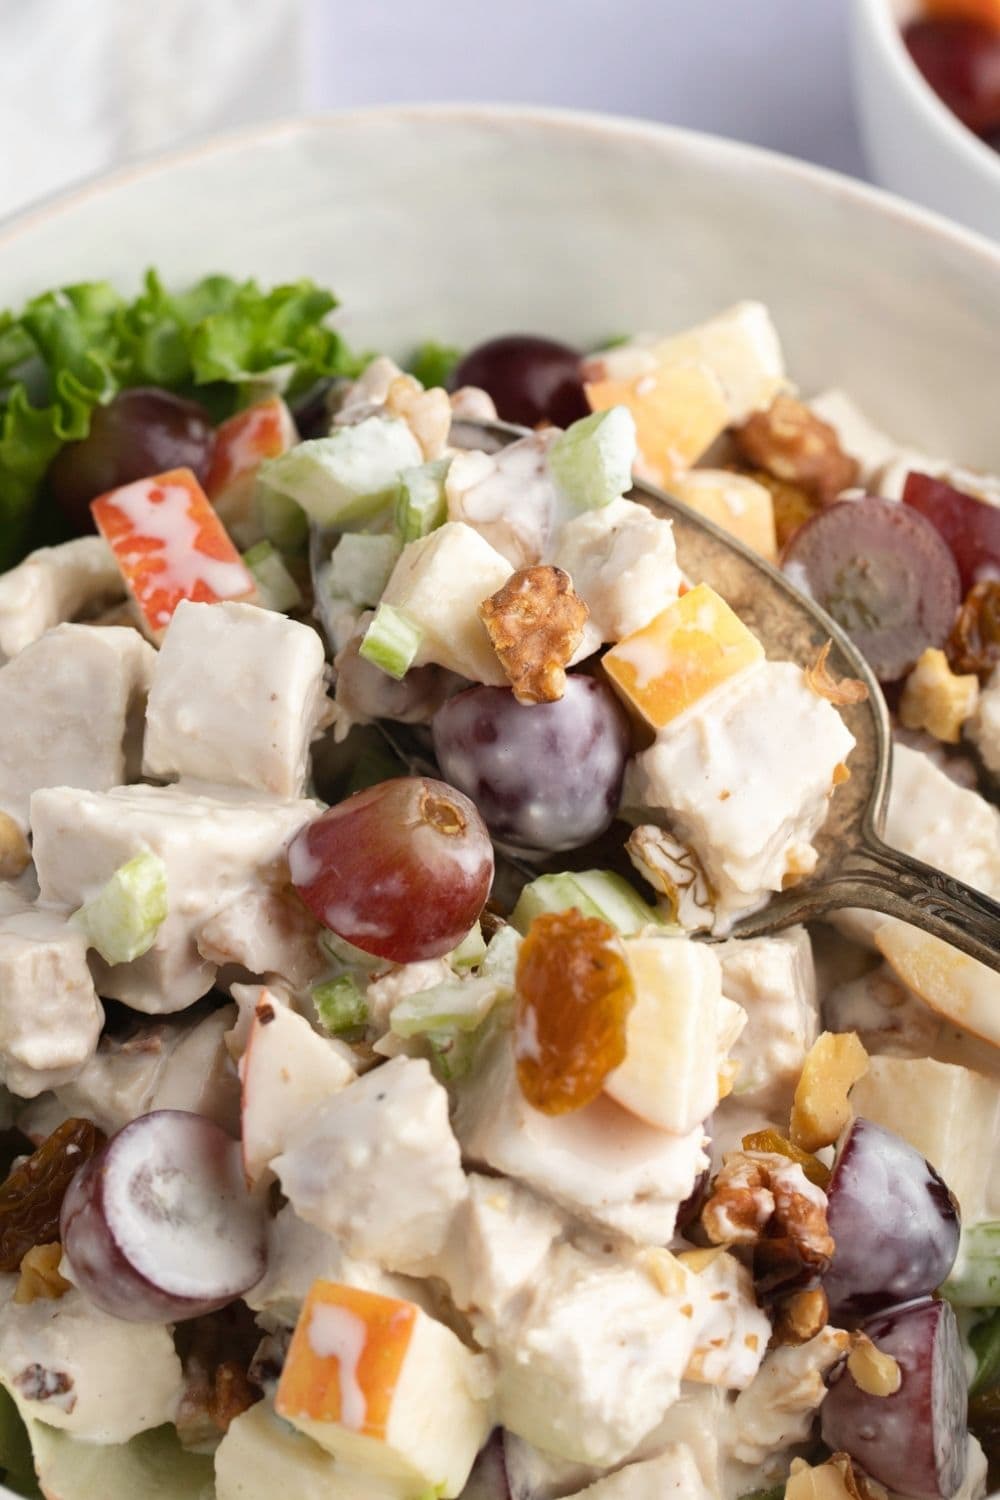 Chicken Waldorf Salad with Grapes, Apples, Walnuts and Lettuce